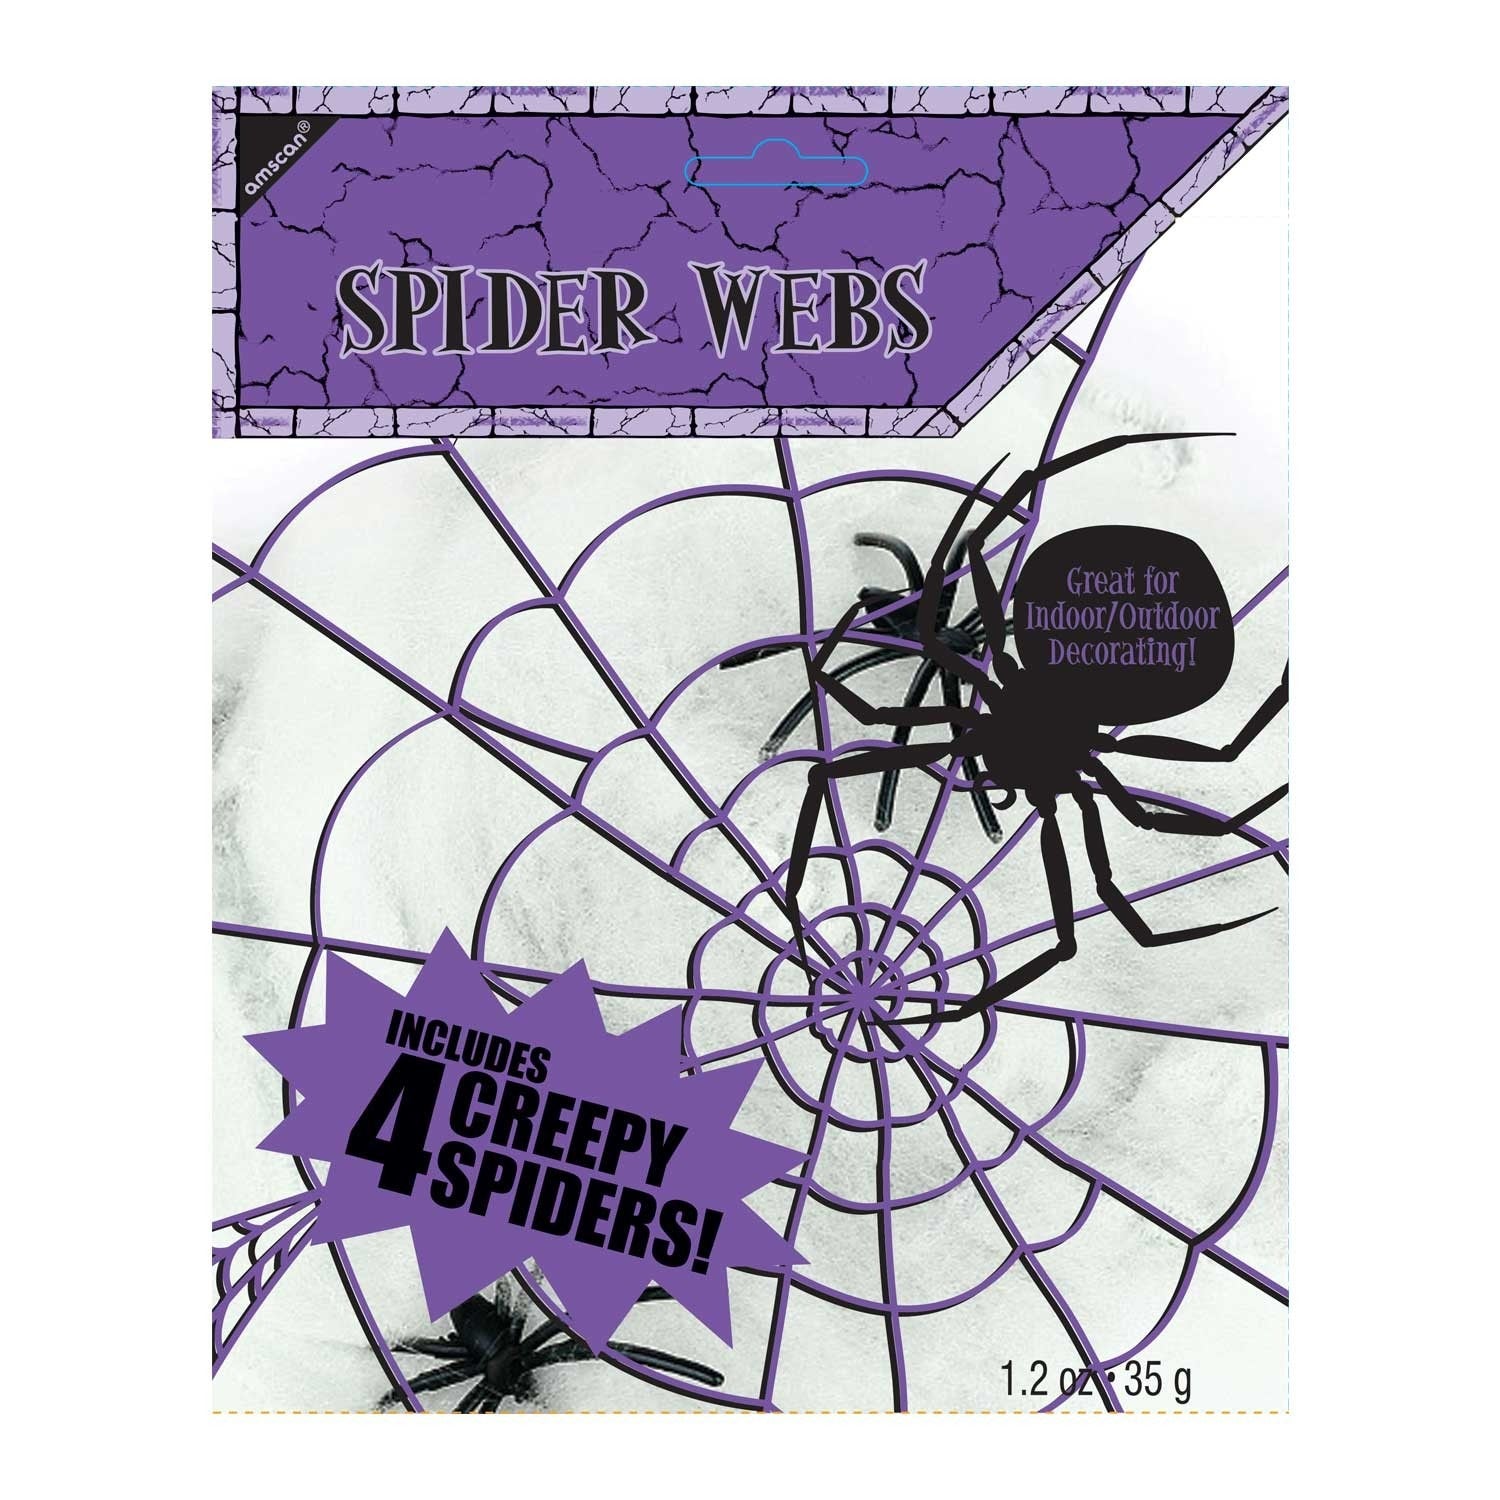 View Small Spider Web Includes 4 Spiders information